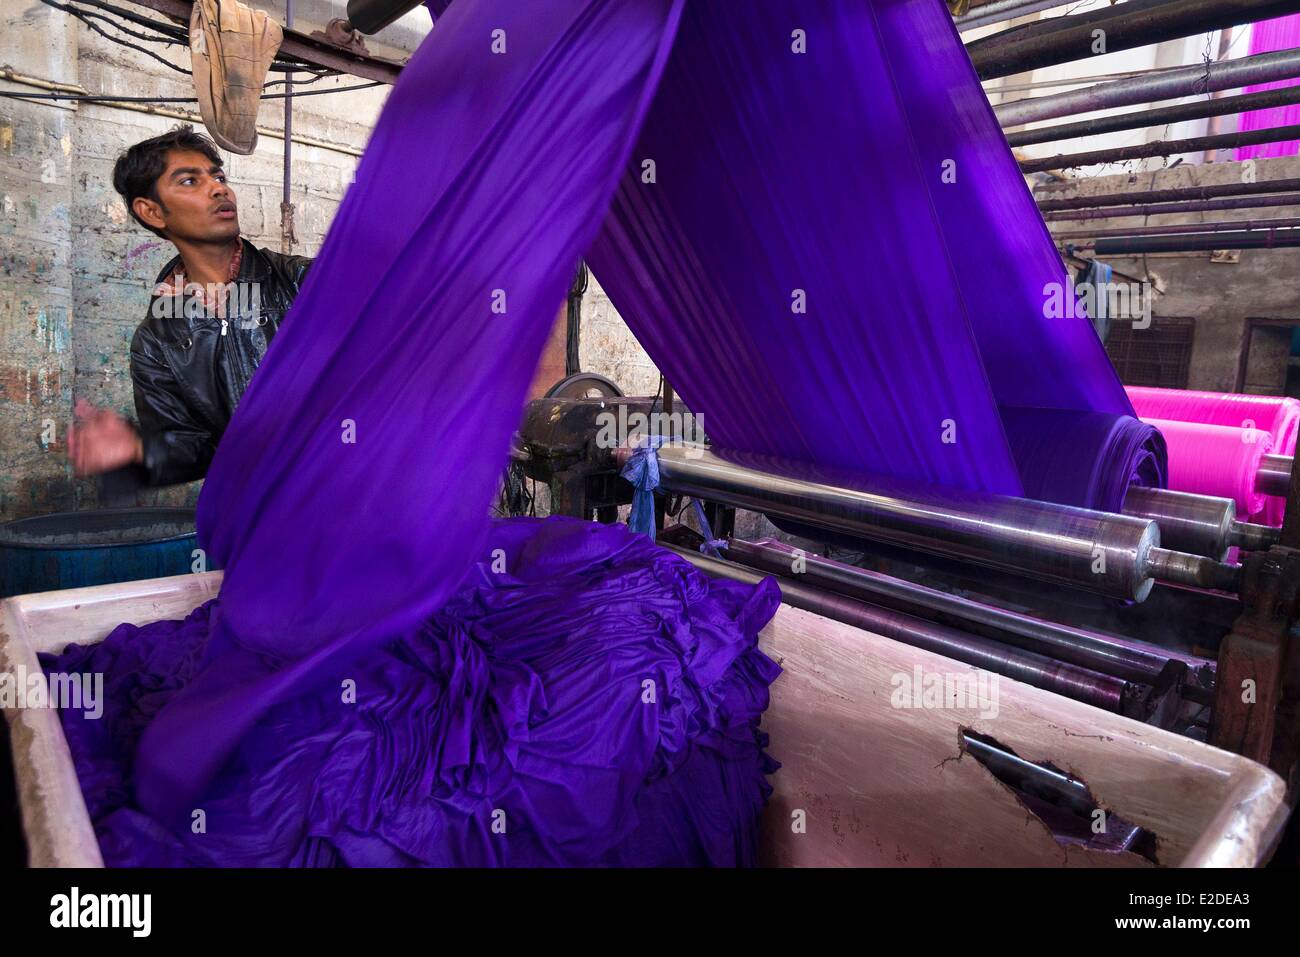 India Rajasthan state Pali Pali is the first town in India for dying textiles drying and folding Stock Photo